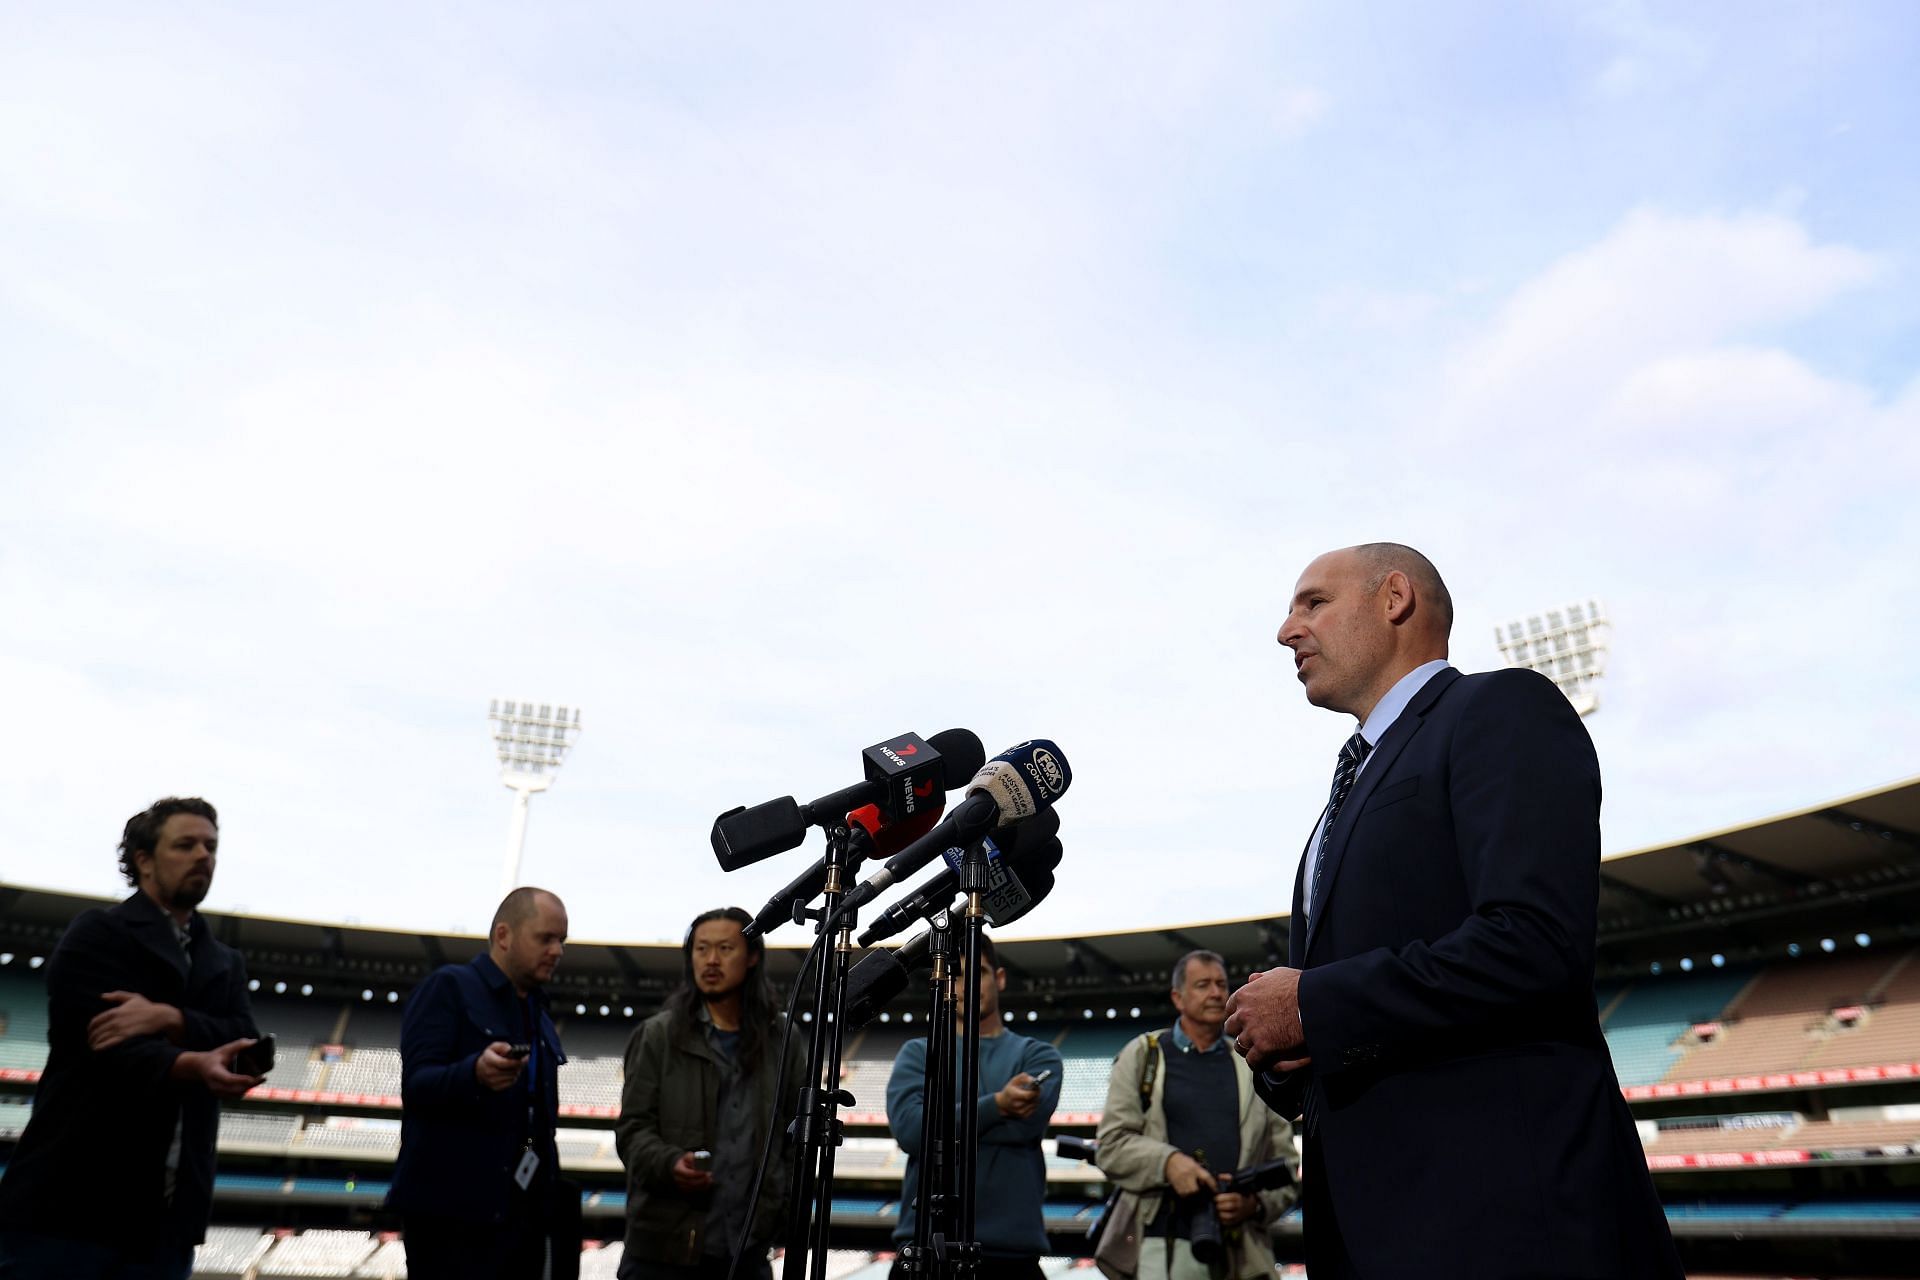 CA Melbourne Media Opportunity After International Schedule Announcement